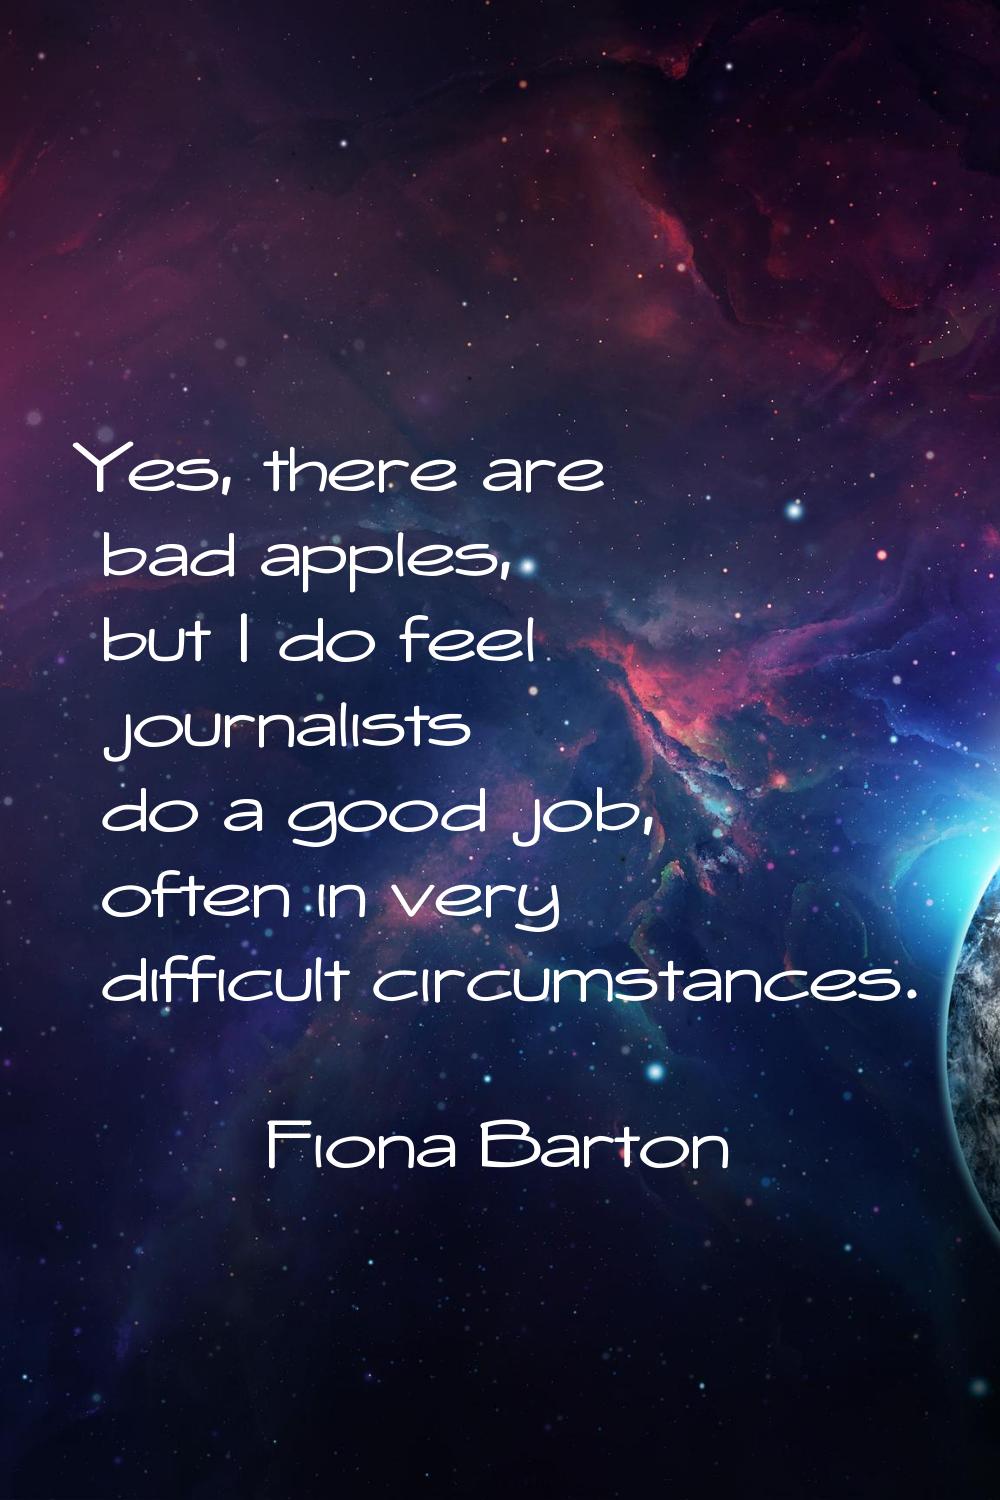 Yes, there are bad apples, but I do feel journalists do a good job, often in very difficult circums